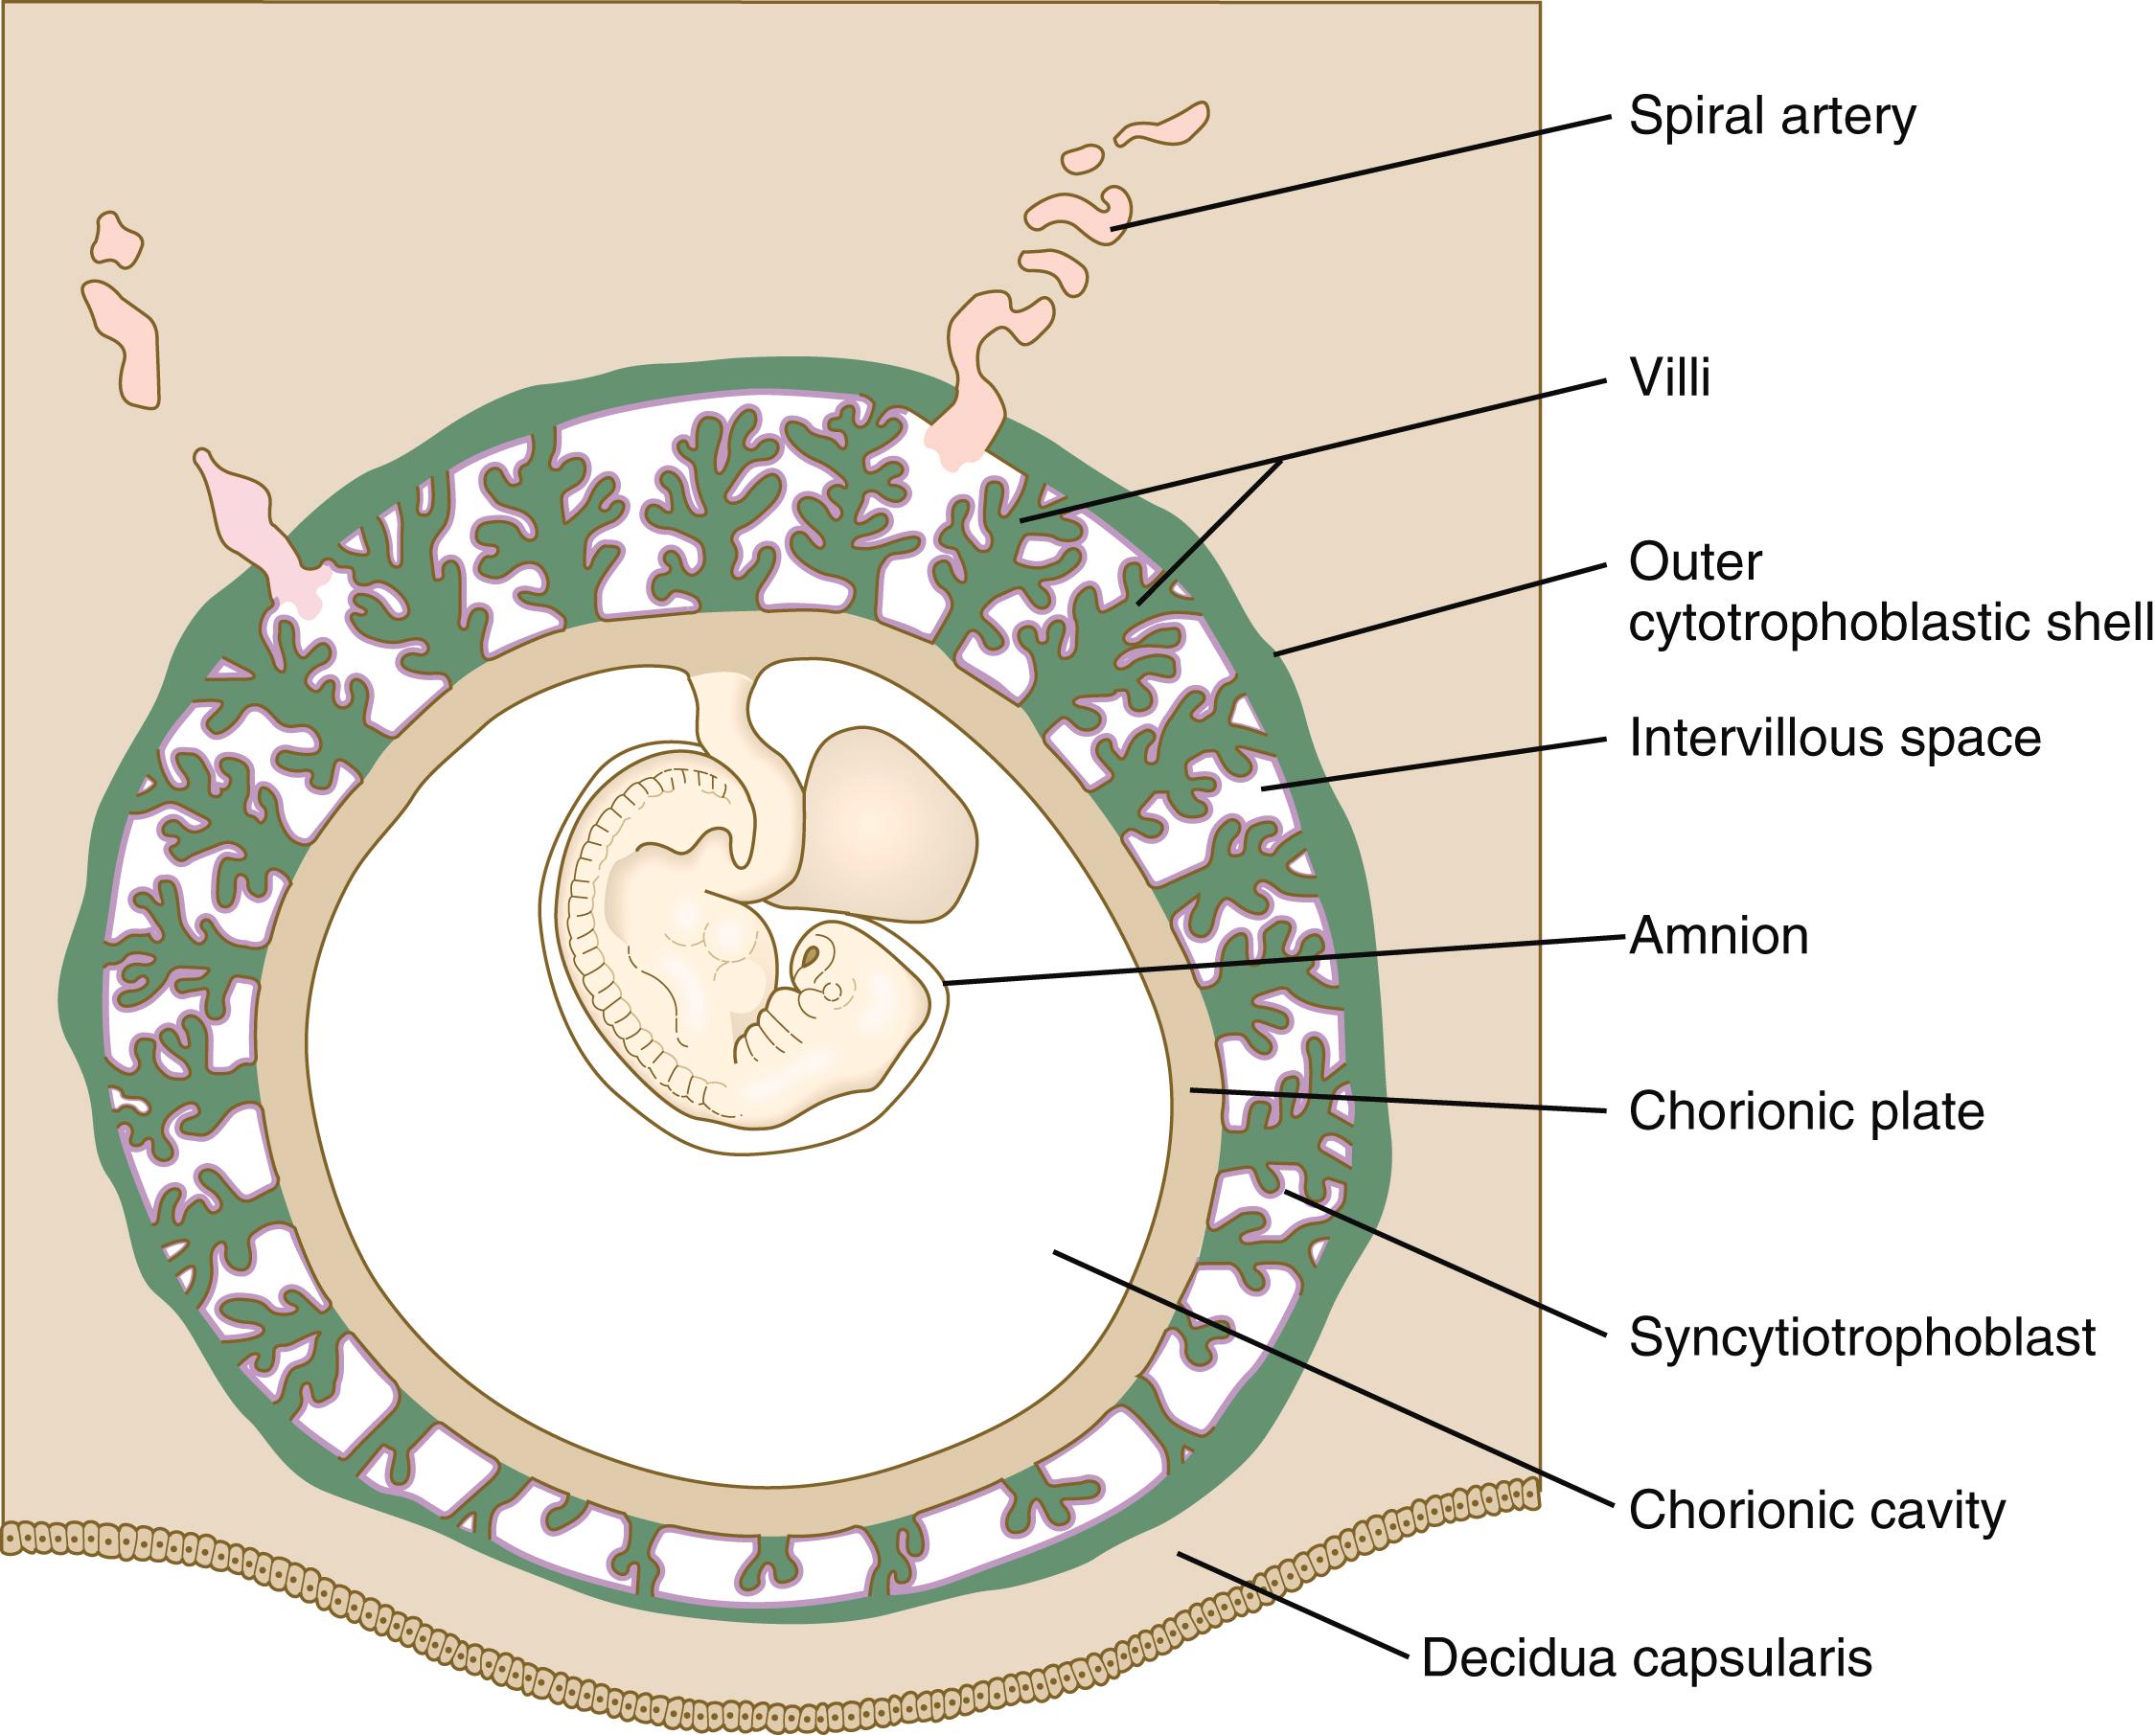 Fig. 7.6, Overall view of a 5-week-old embryo in addition to membranes showing the relationships of the chorionic plate, villi, and outer cytotrophoblastic shell.